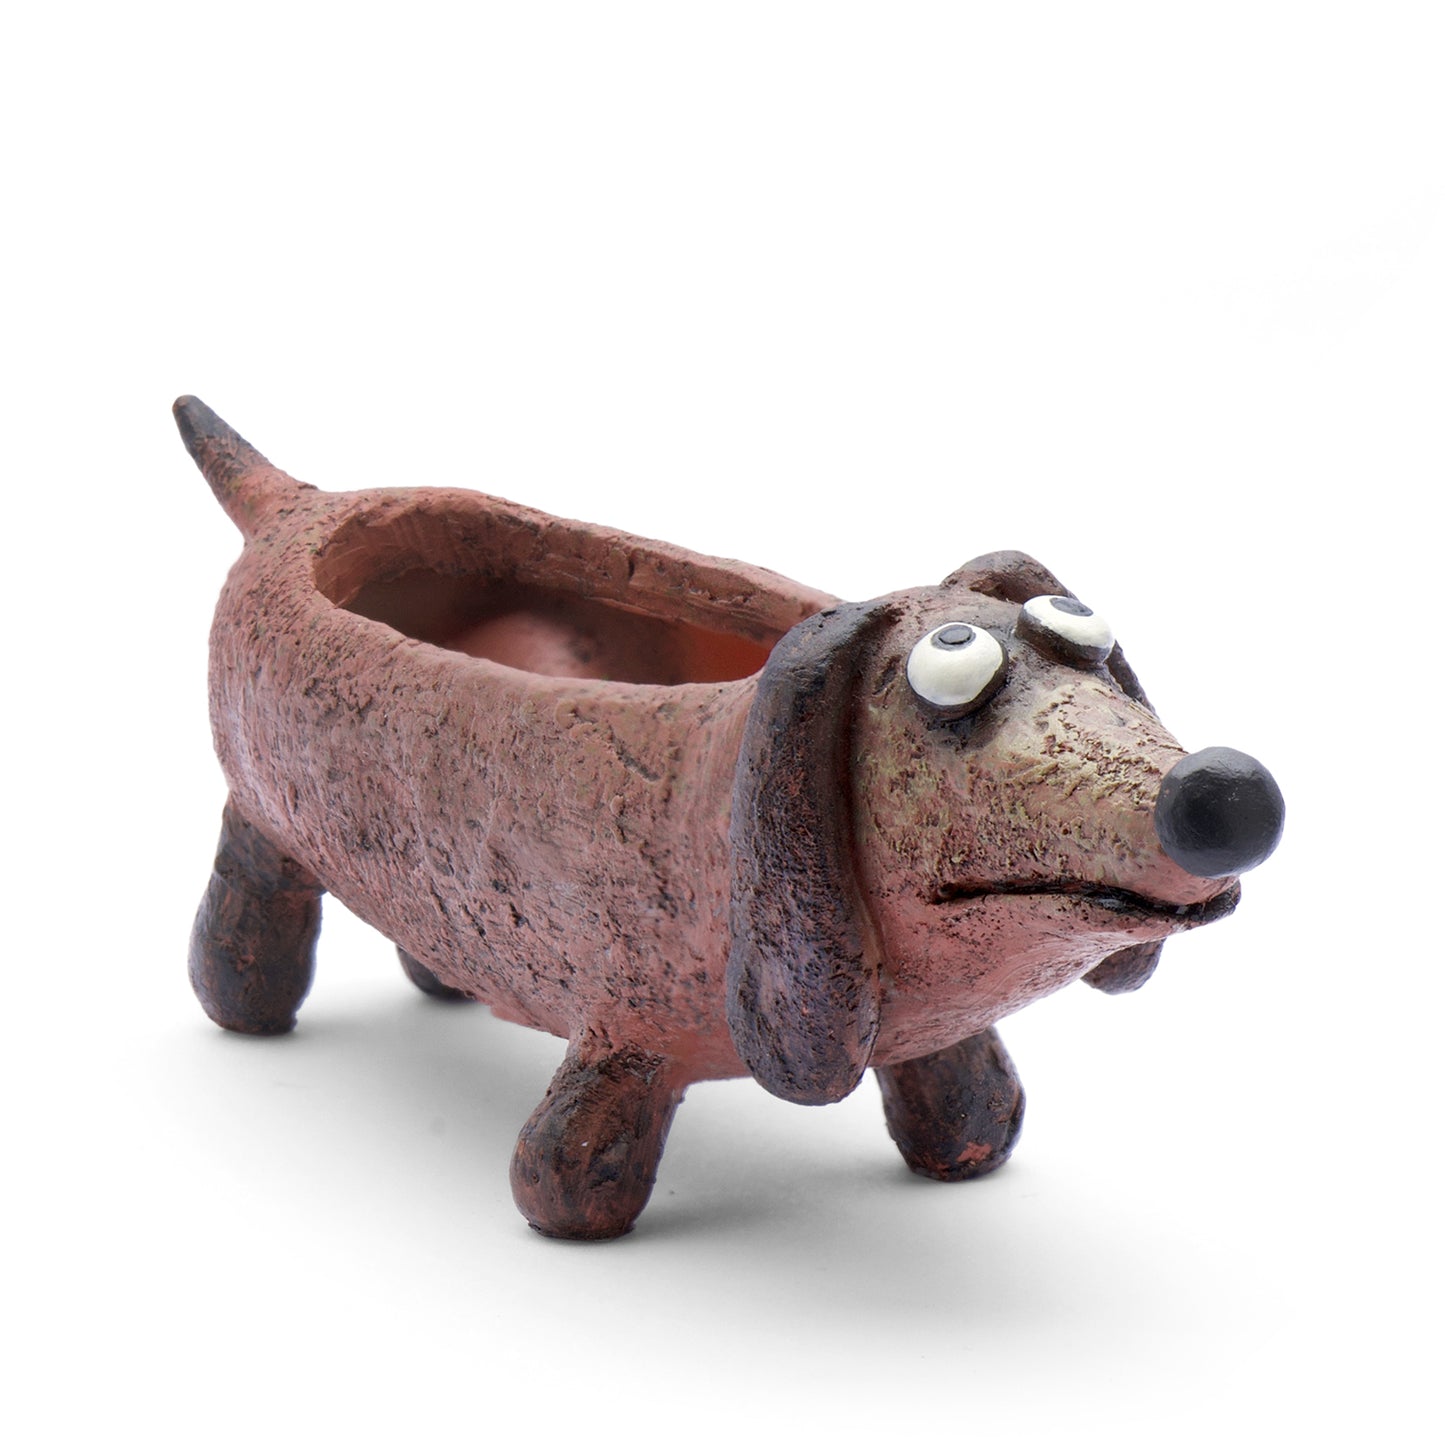 Baby Doxie the Dog Planter